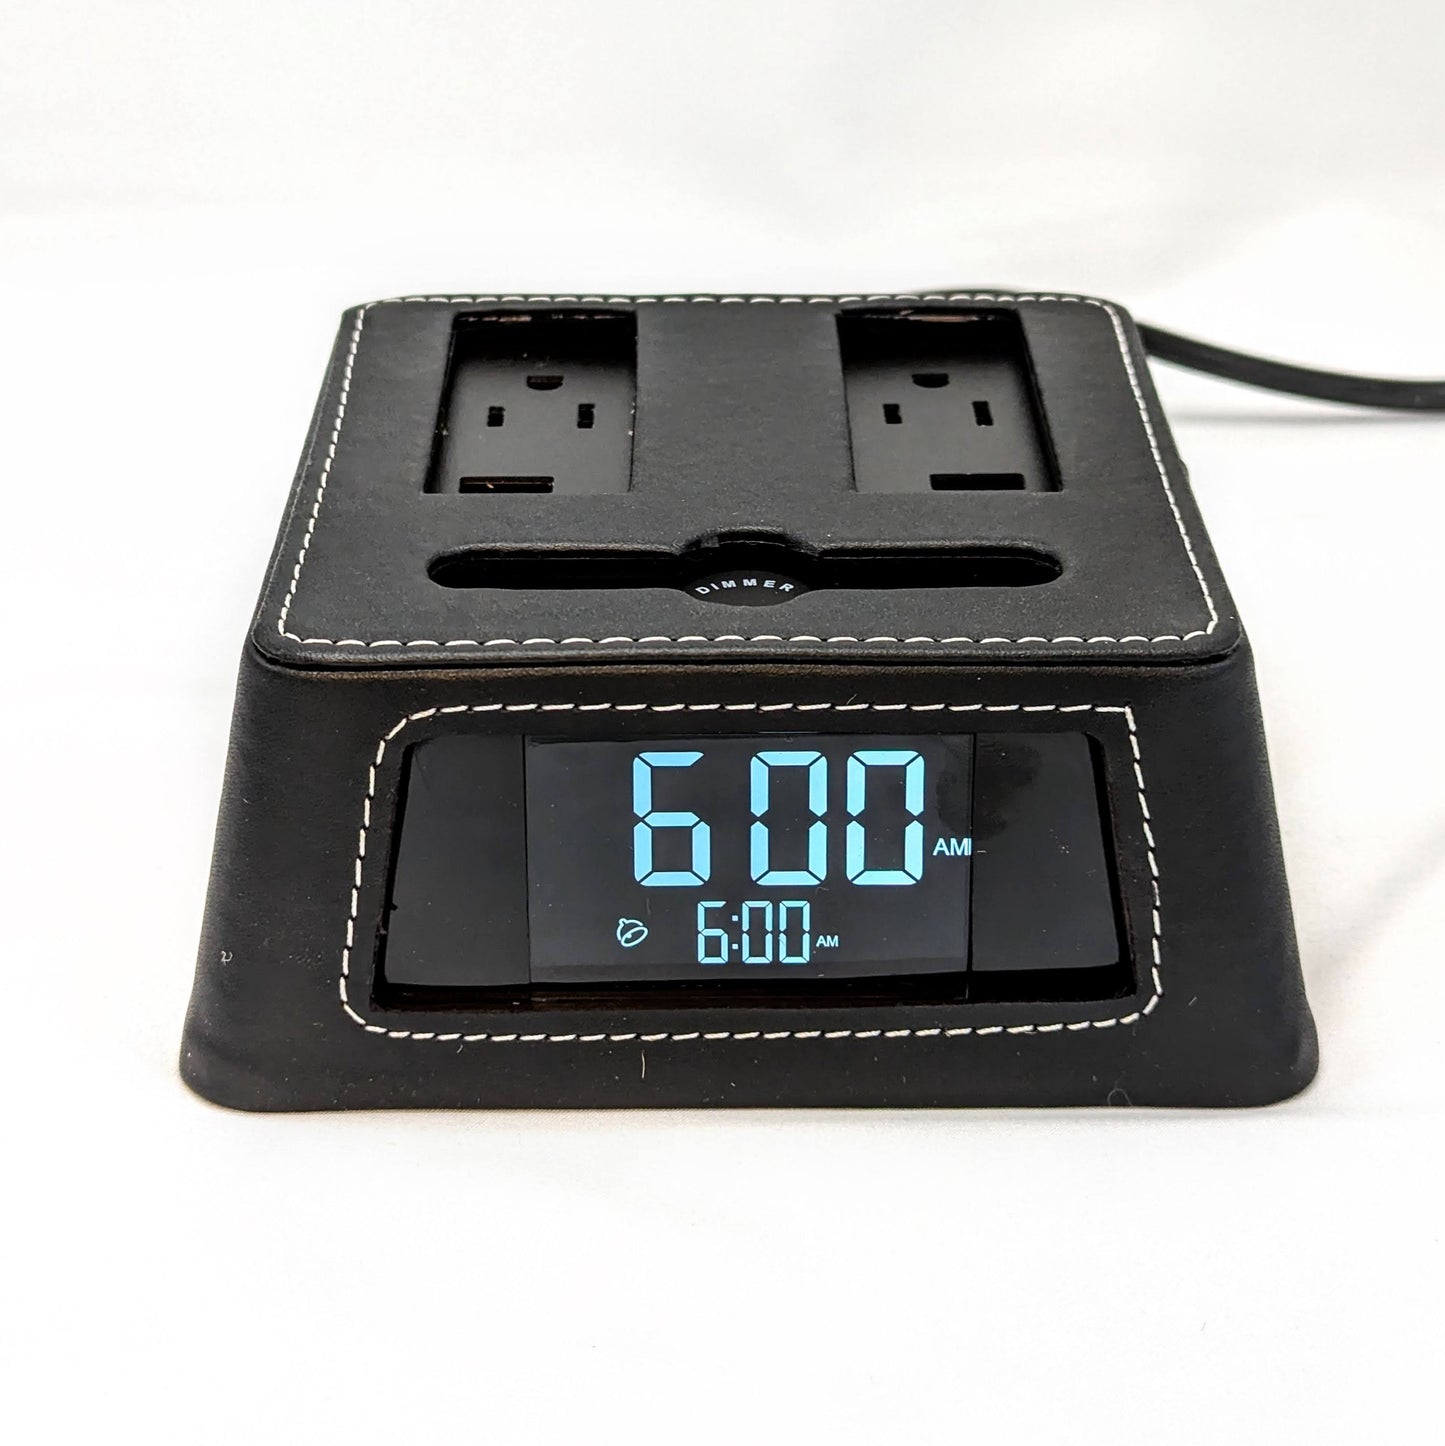 Power Hub Ultra with Sleek Alarm Clock | Redefining Charging | Charge up to 6 Devices Using only one Wall Outlet | Attractive Dependable Table Charging | Made by G.U.S of San Francisco